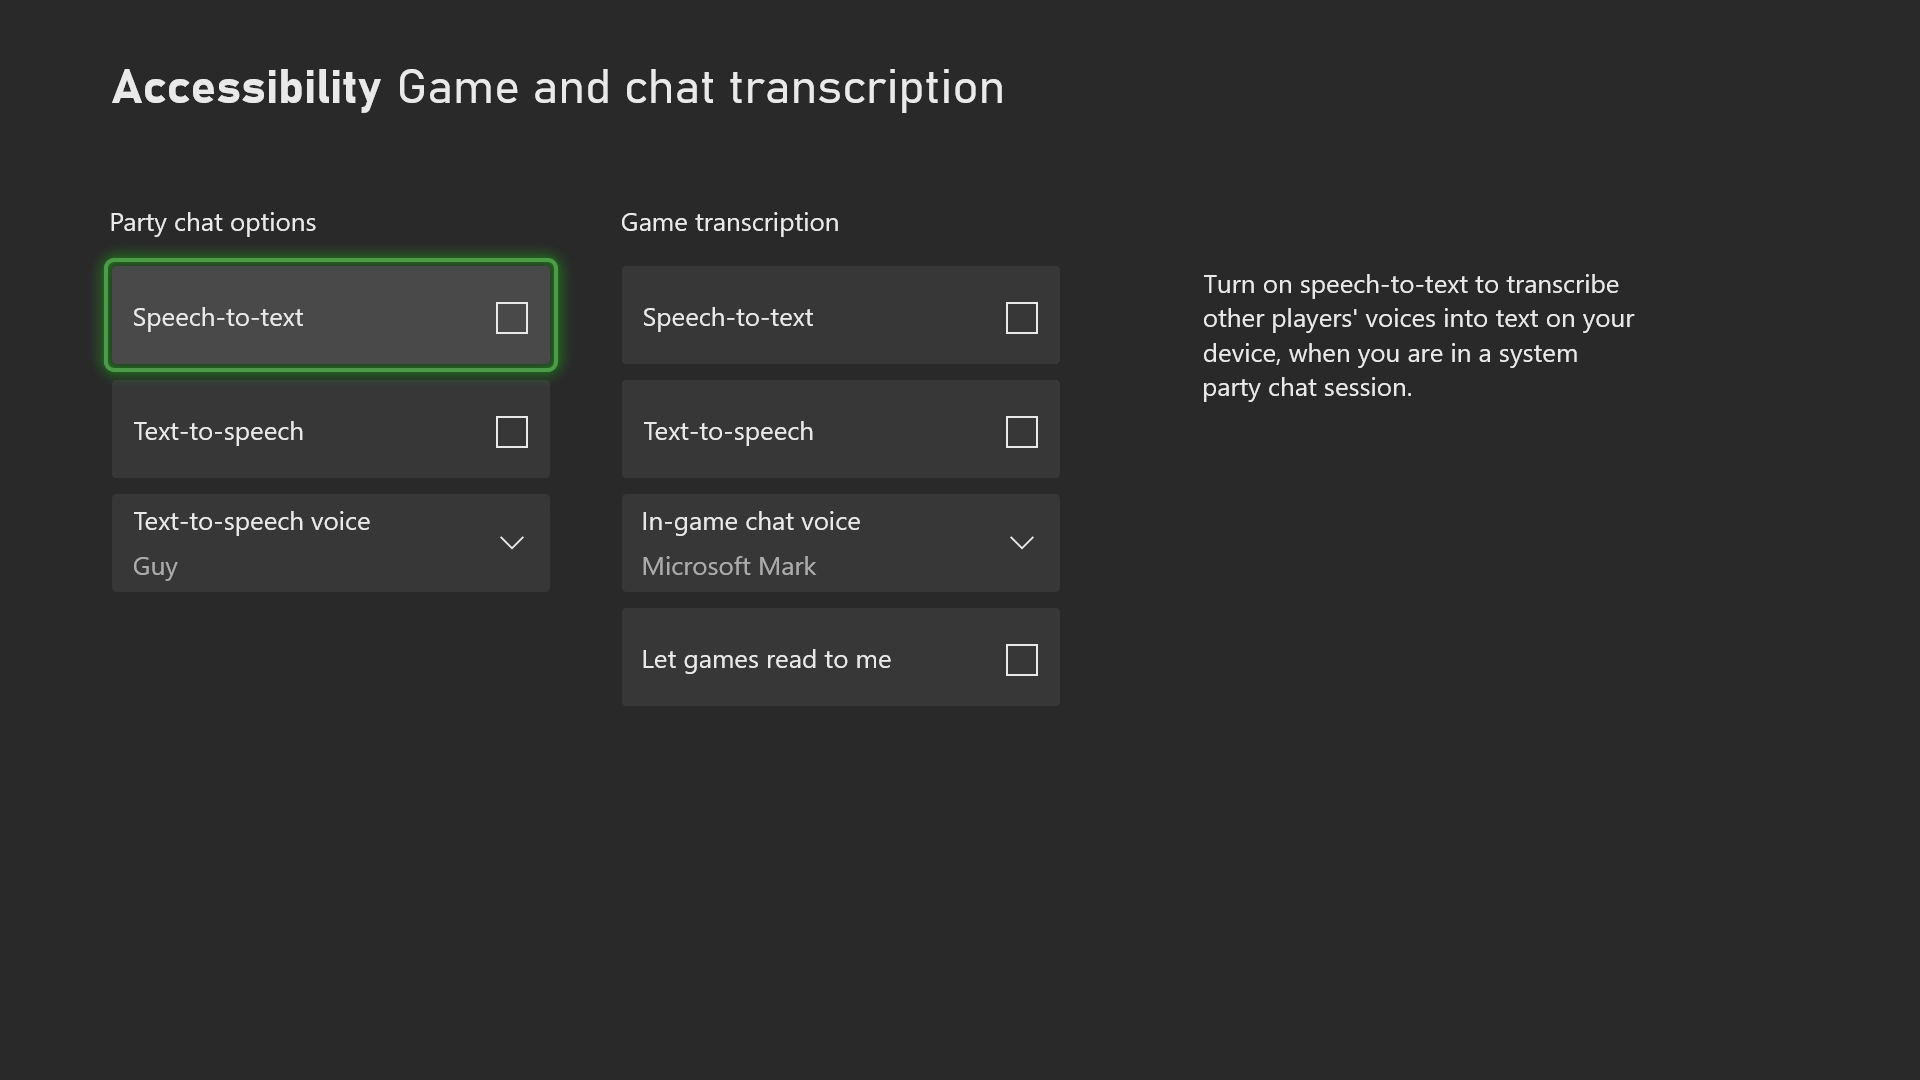 A screenshot that shows the Xbox Accessibility Game and chat transcription settings. Two columns of settings are shown. The left column of settings is labeled Party chat options. Underneath are two checkboxes: Speech to text and Text to speech. A list box is labeled Text to speech voice: Guy. The right column of settings is labeled Game transcription. Underneath are three checkboxes: Speech to text, Text to speech, and Let games read to me. A list box is labeled In-game chat voice: Microsoft Mark. Text on the screen reads: Turn on speech to text to transcribe other players' voices into text on your device, when you are in a system party chat session.